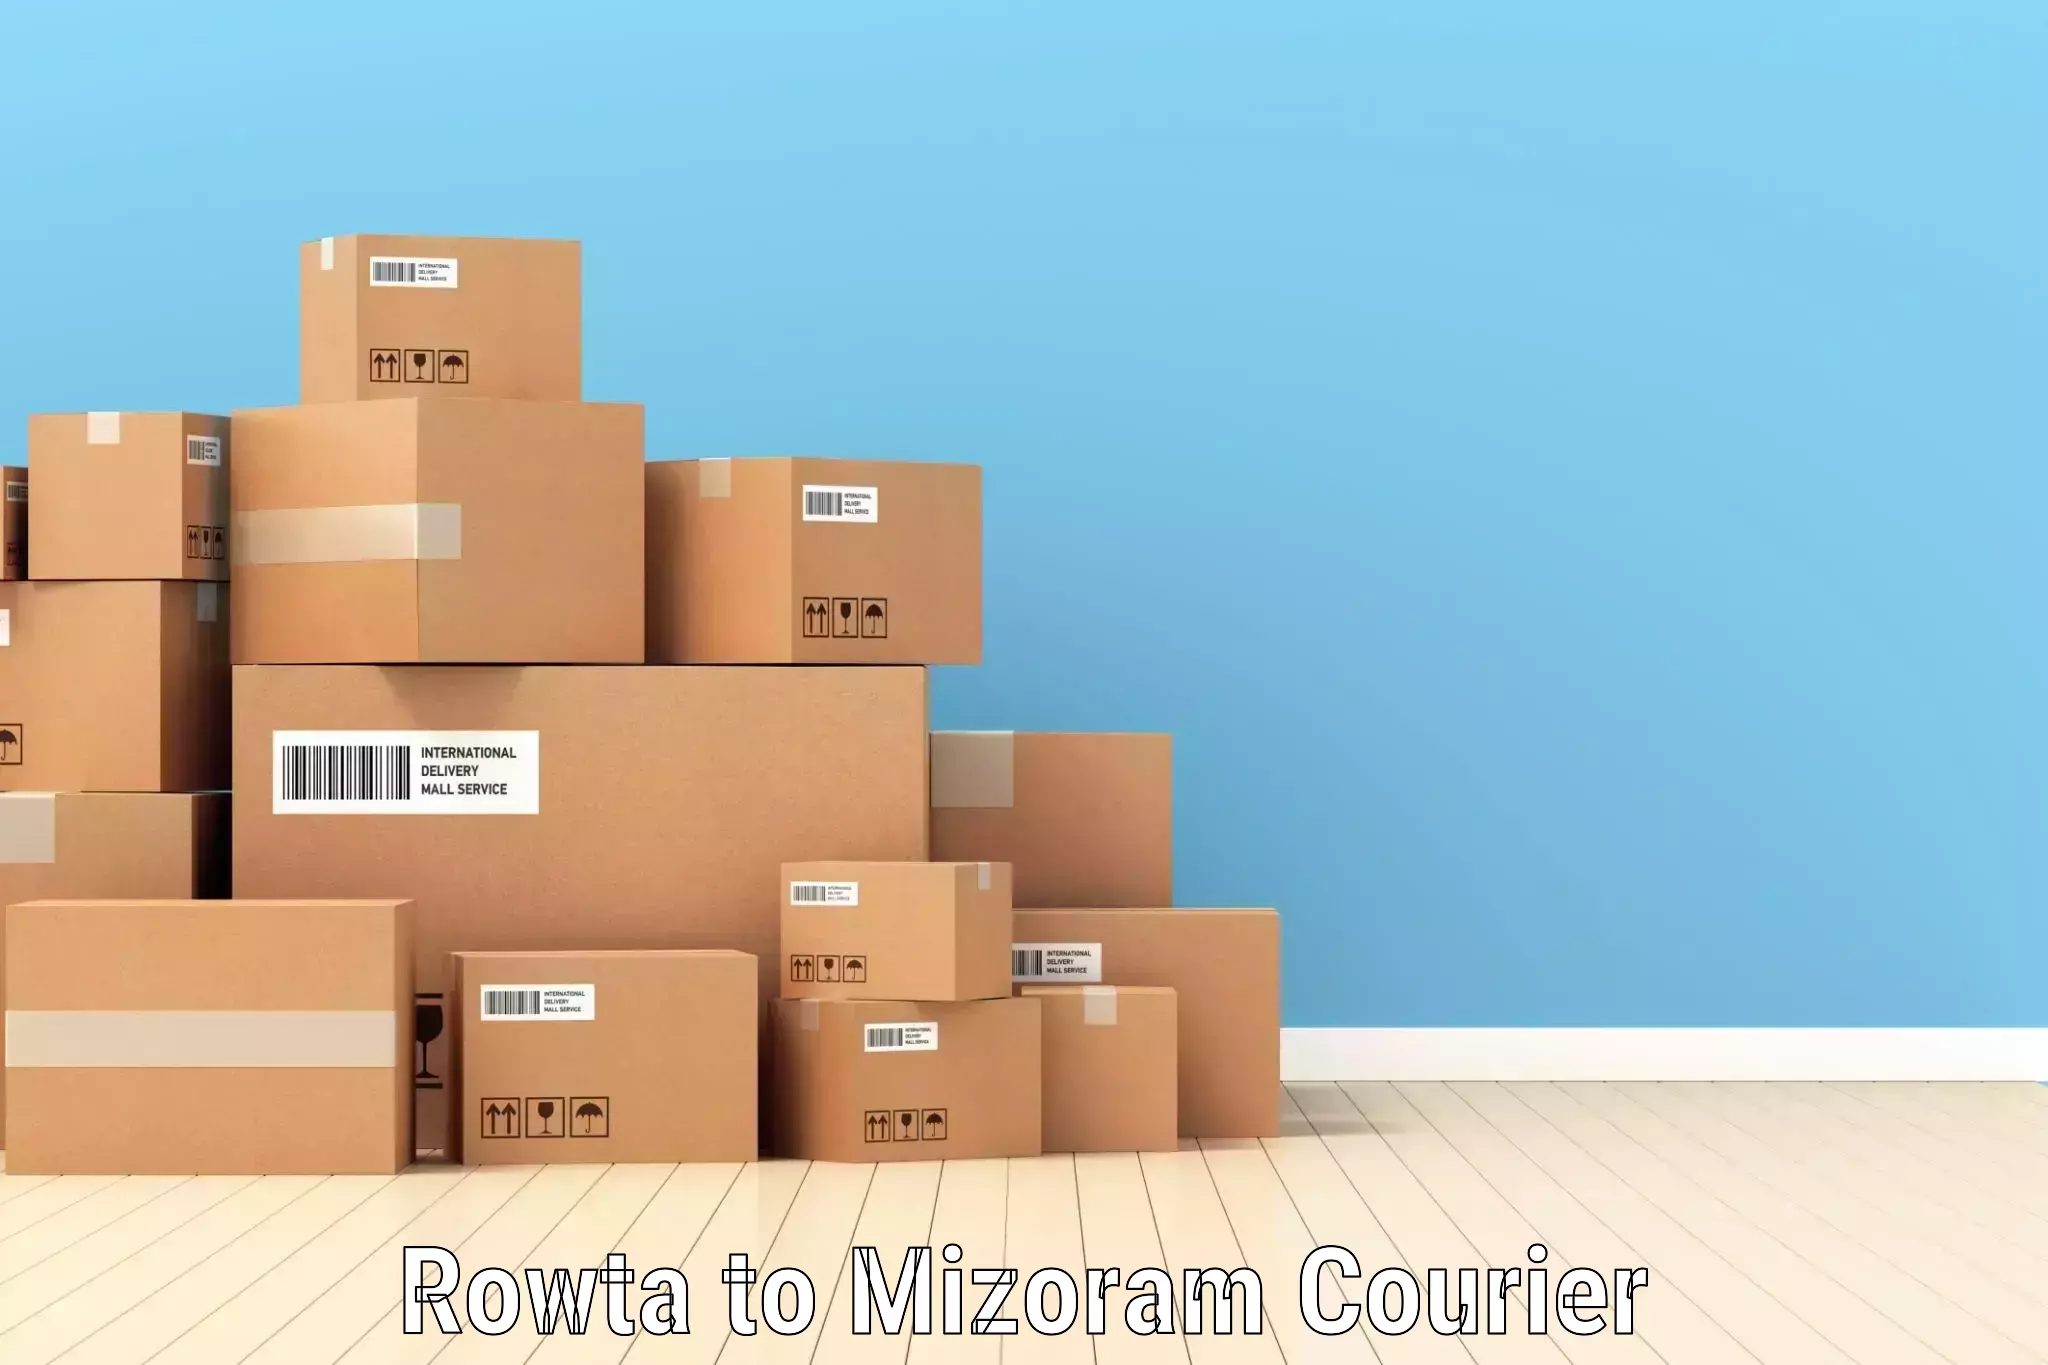 Multi-service courier options in Rowta to Mizoram